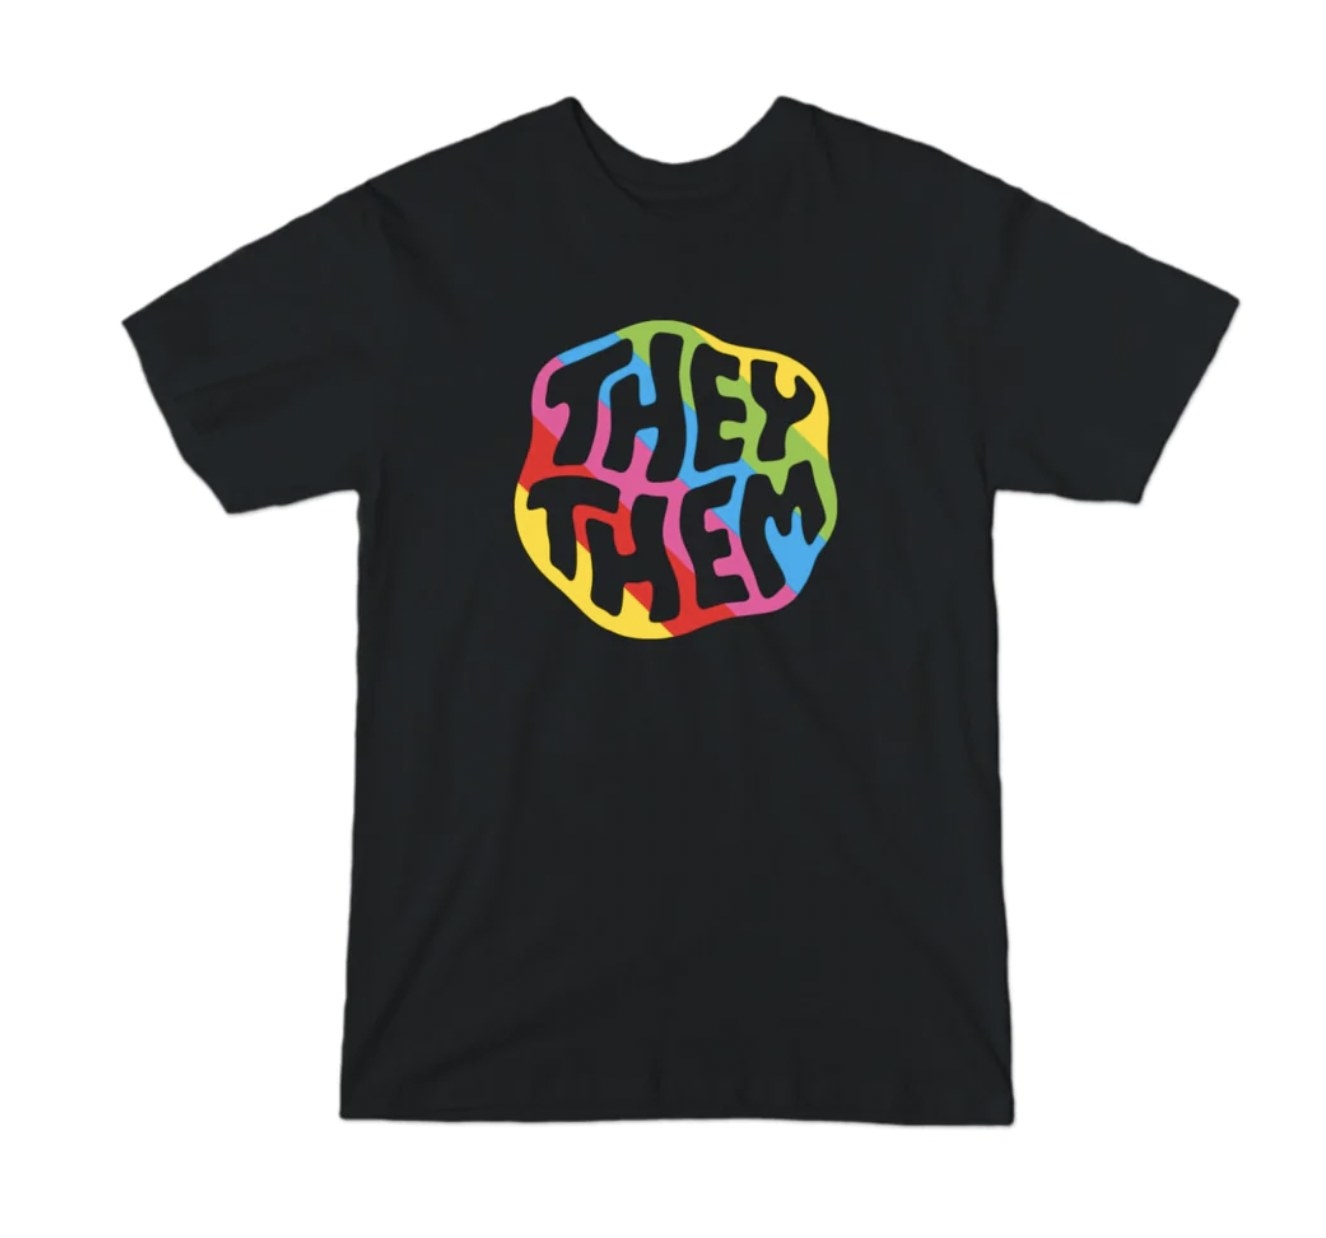 the black t-shirt with rainbow logo and squiggly text that says they/them